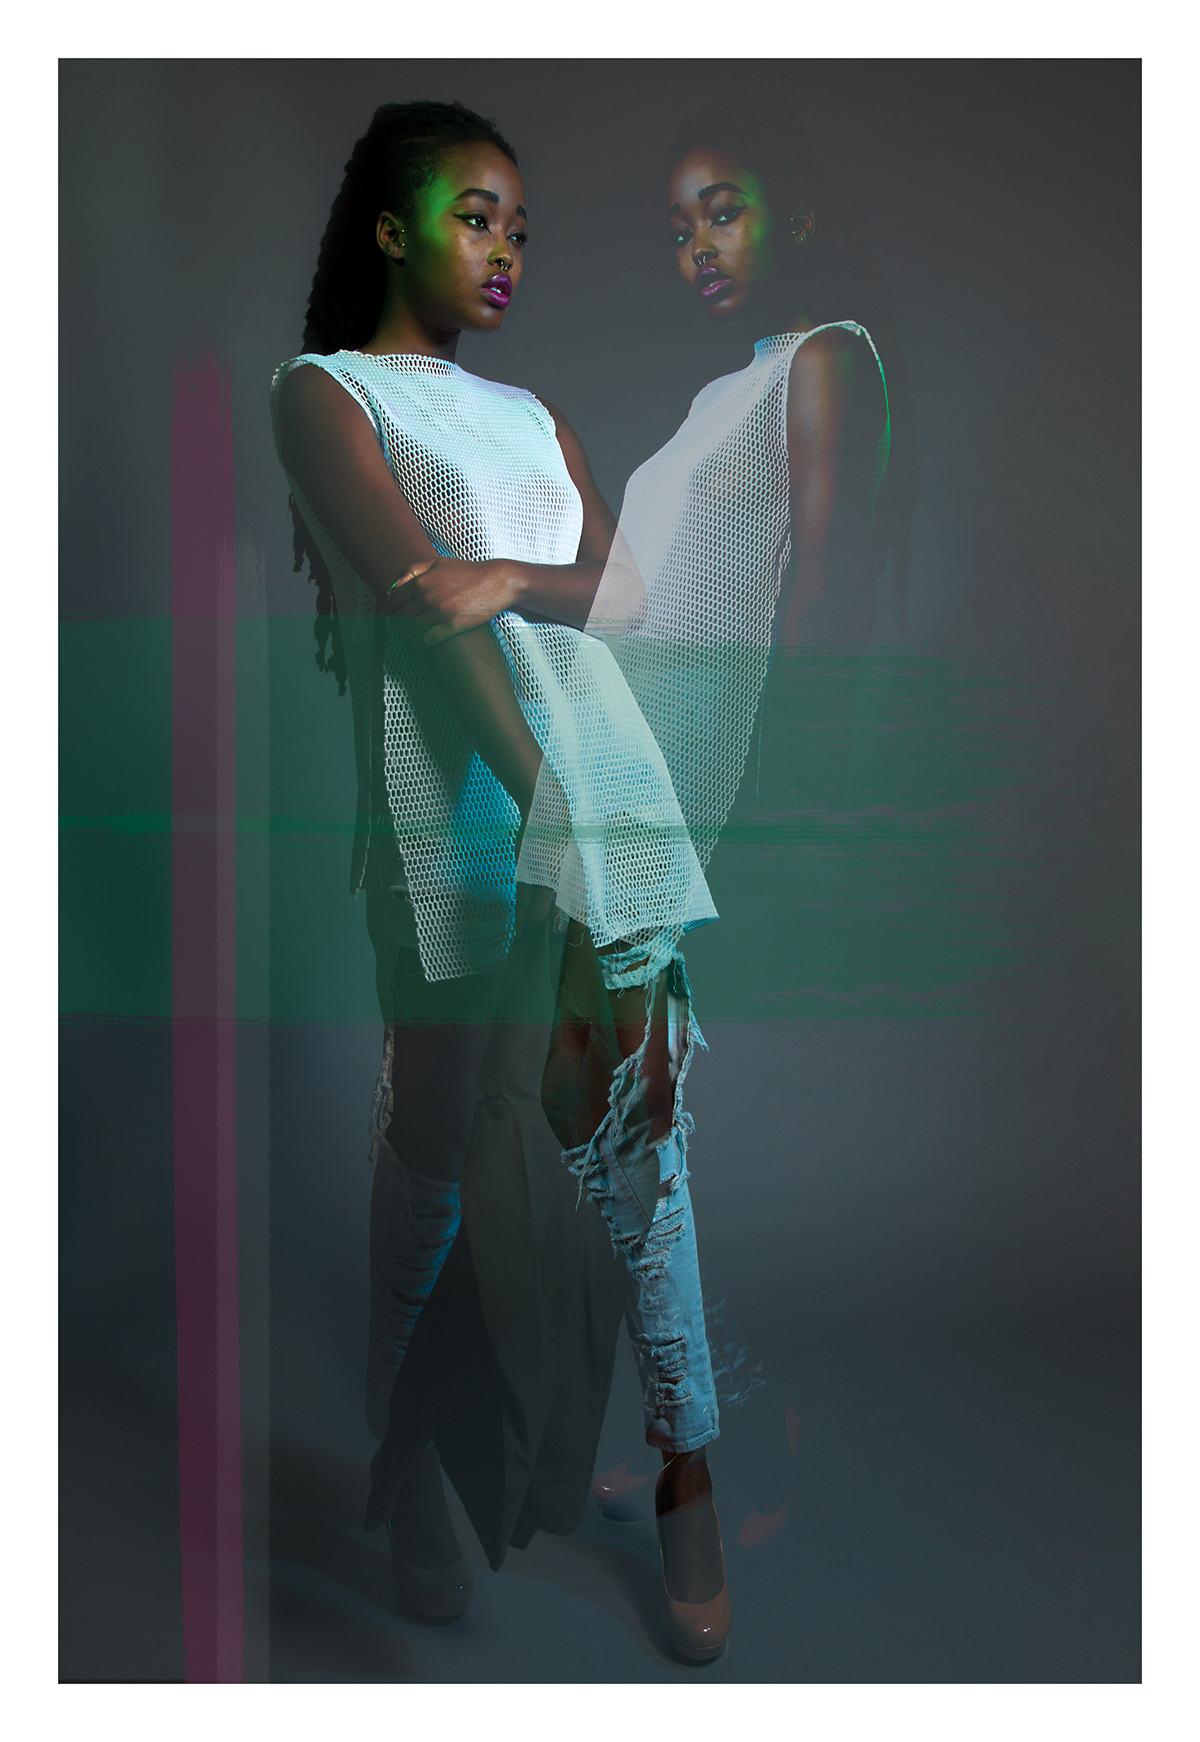 movement fashion photography brush strokes colored gels